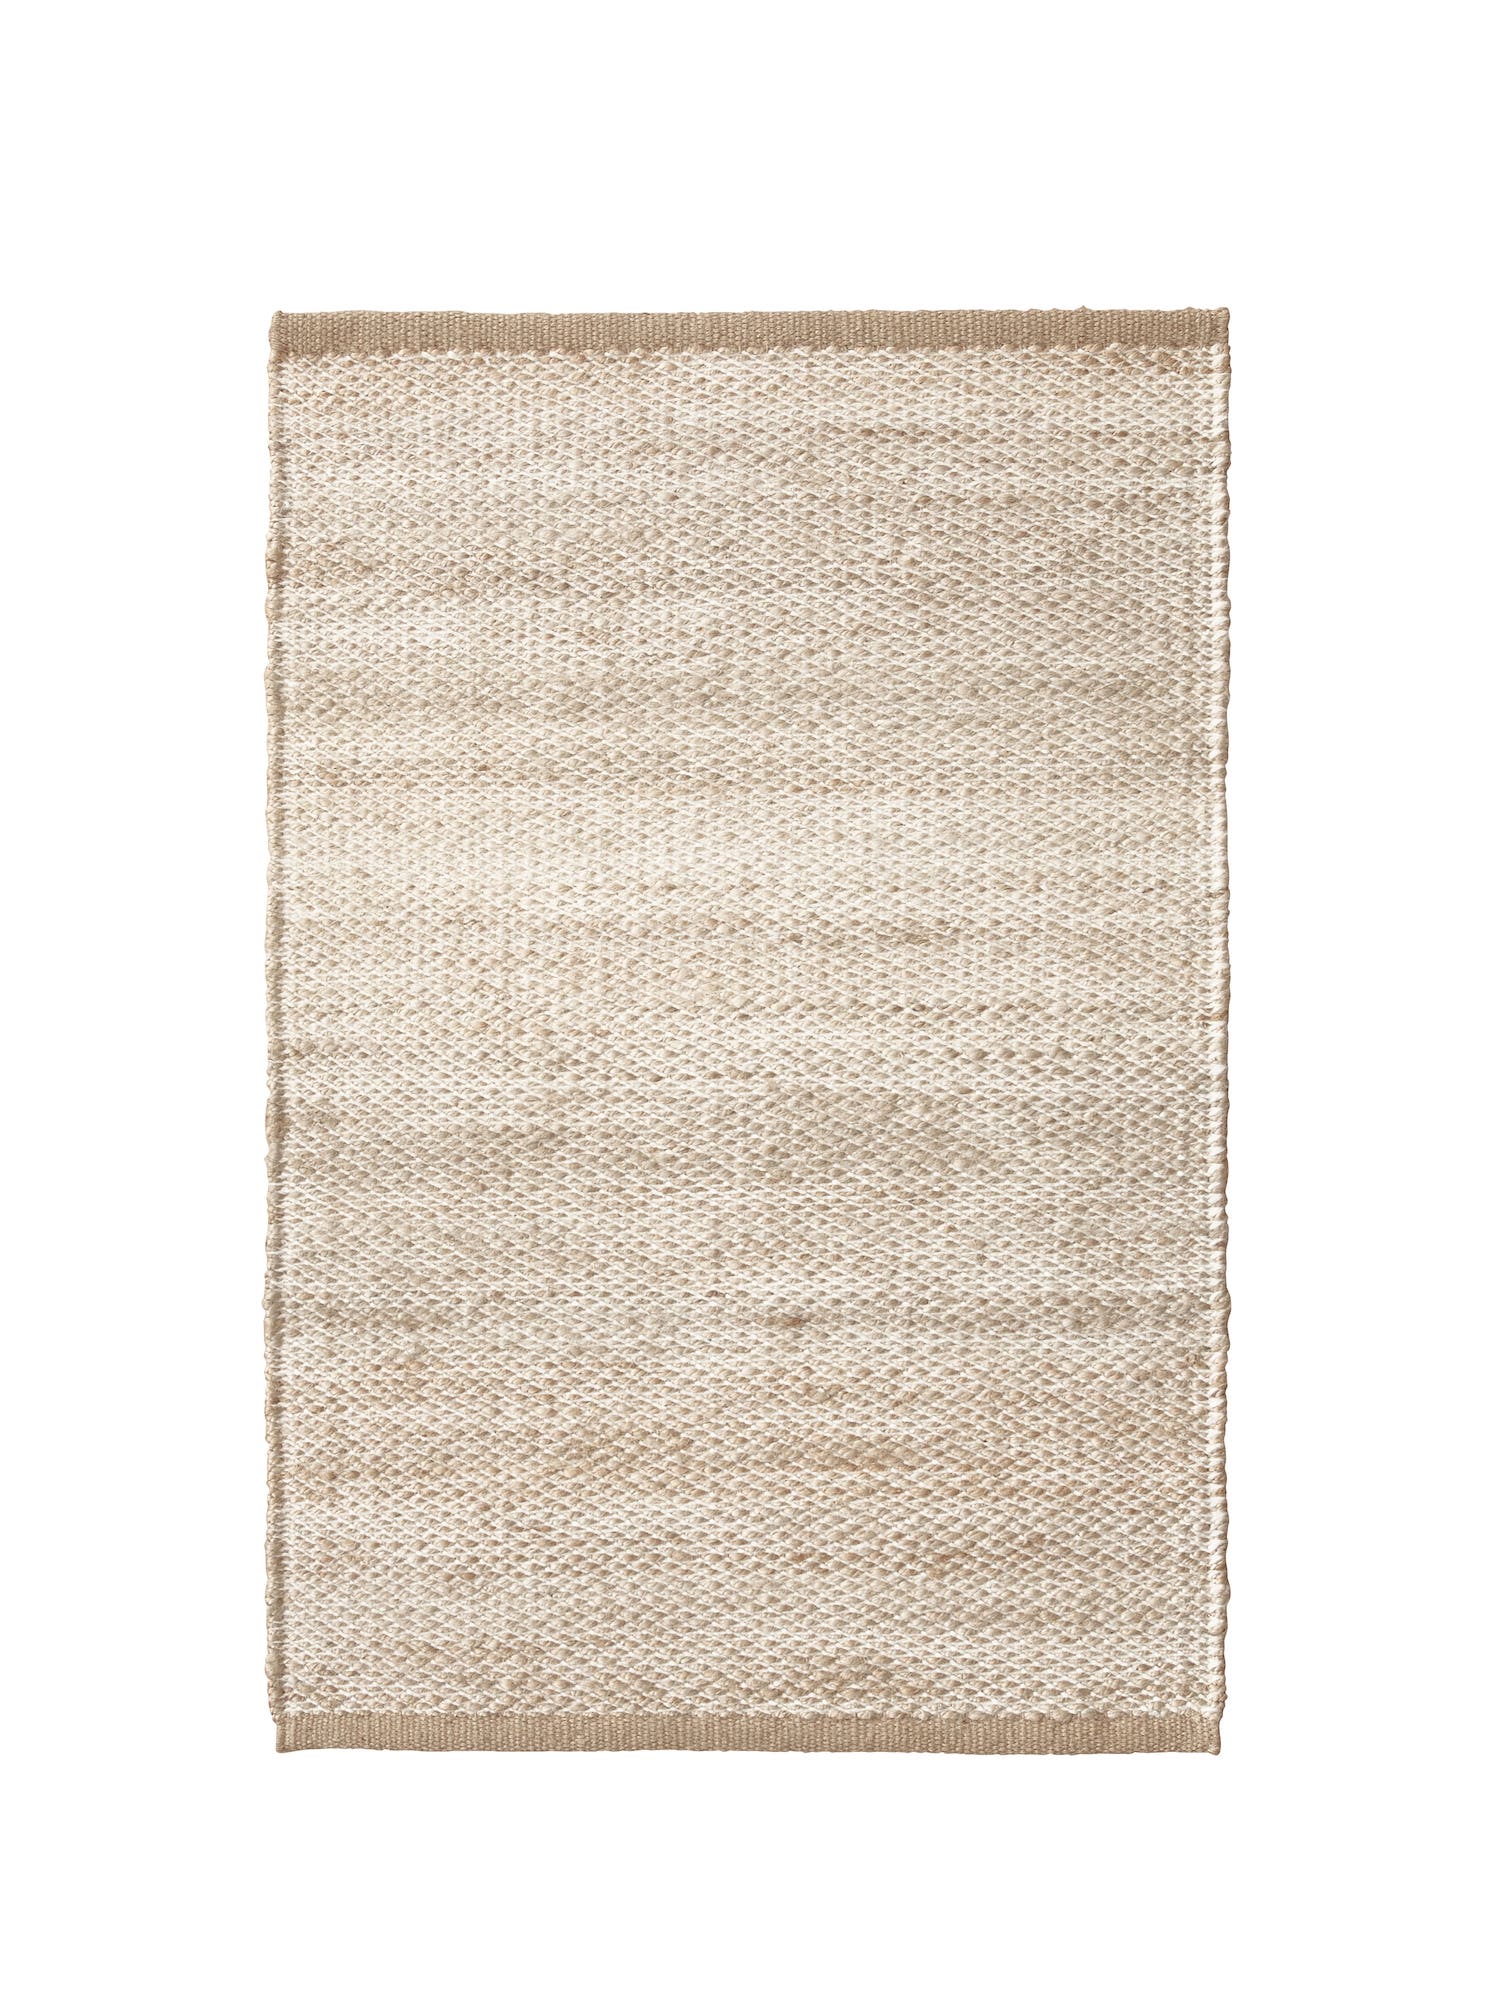 Ridge Jute & Wool Rug. A simple, fresh rug with gorgeous variation in hue and texture thanks to alternating lines of white and natural, un-dyed jute. 